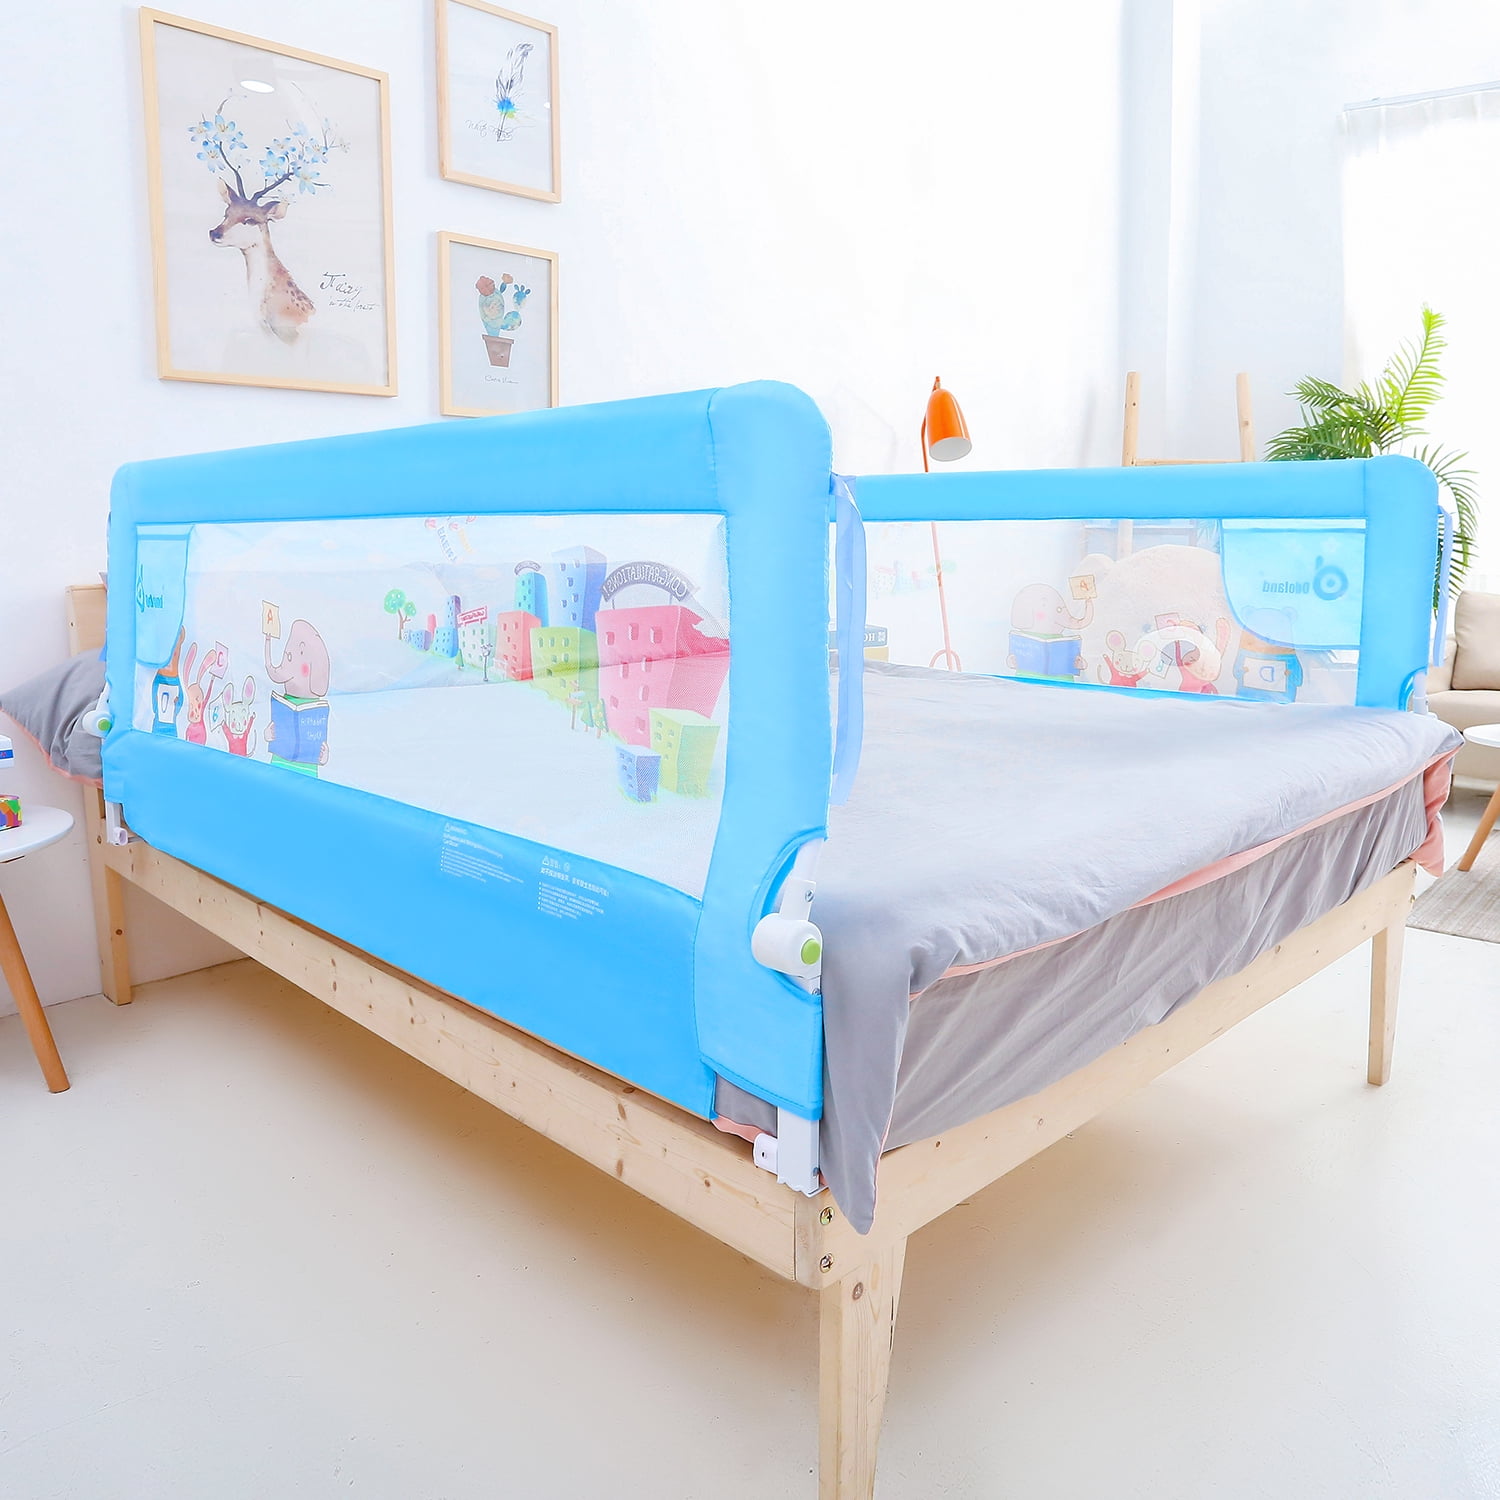 double baby bed